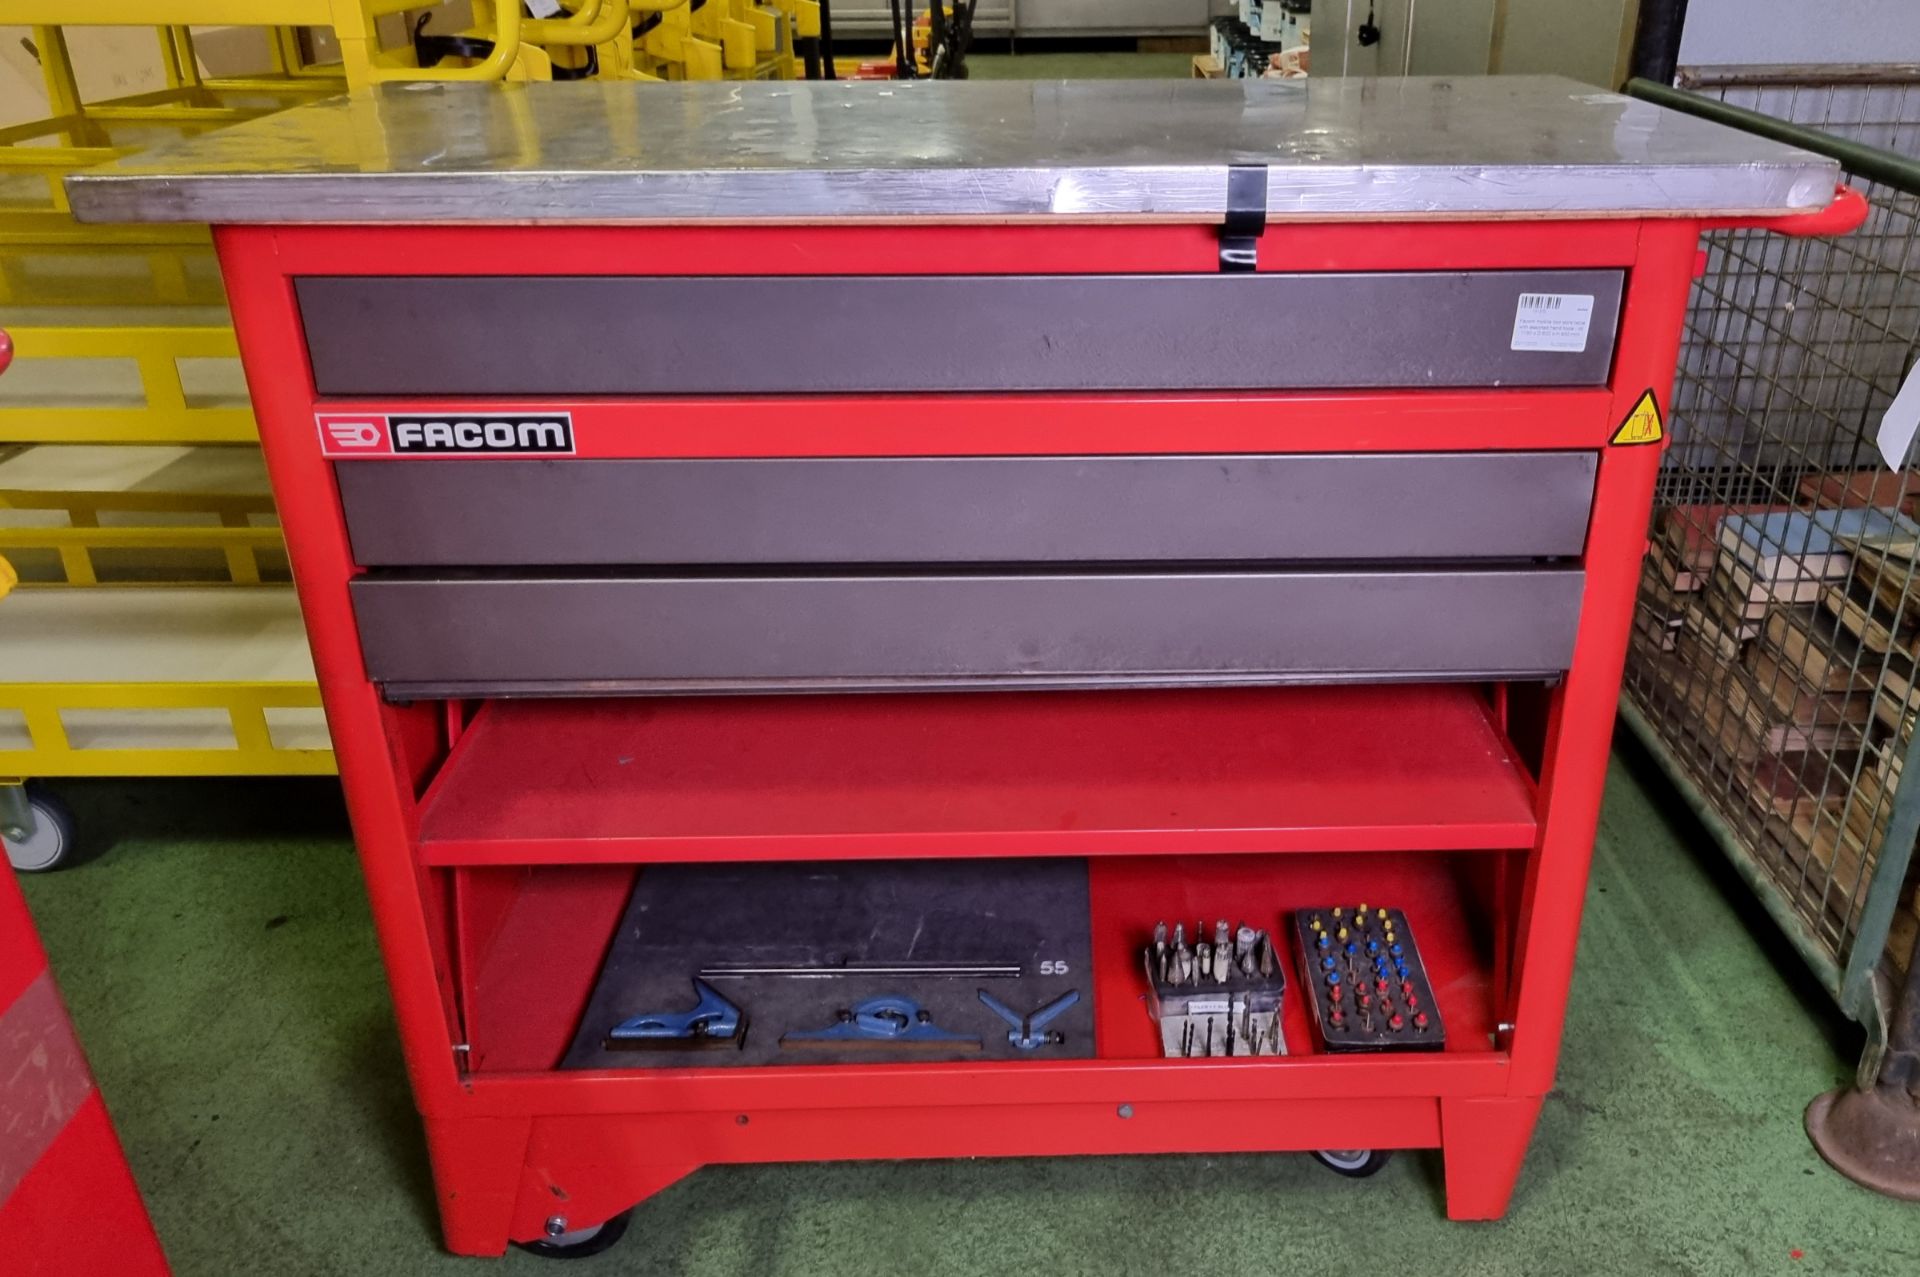 Facom mobile tool work table with assorted hand tools - W 1180 x D 600 x H 980mm